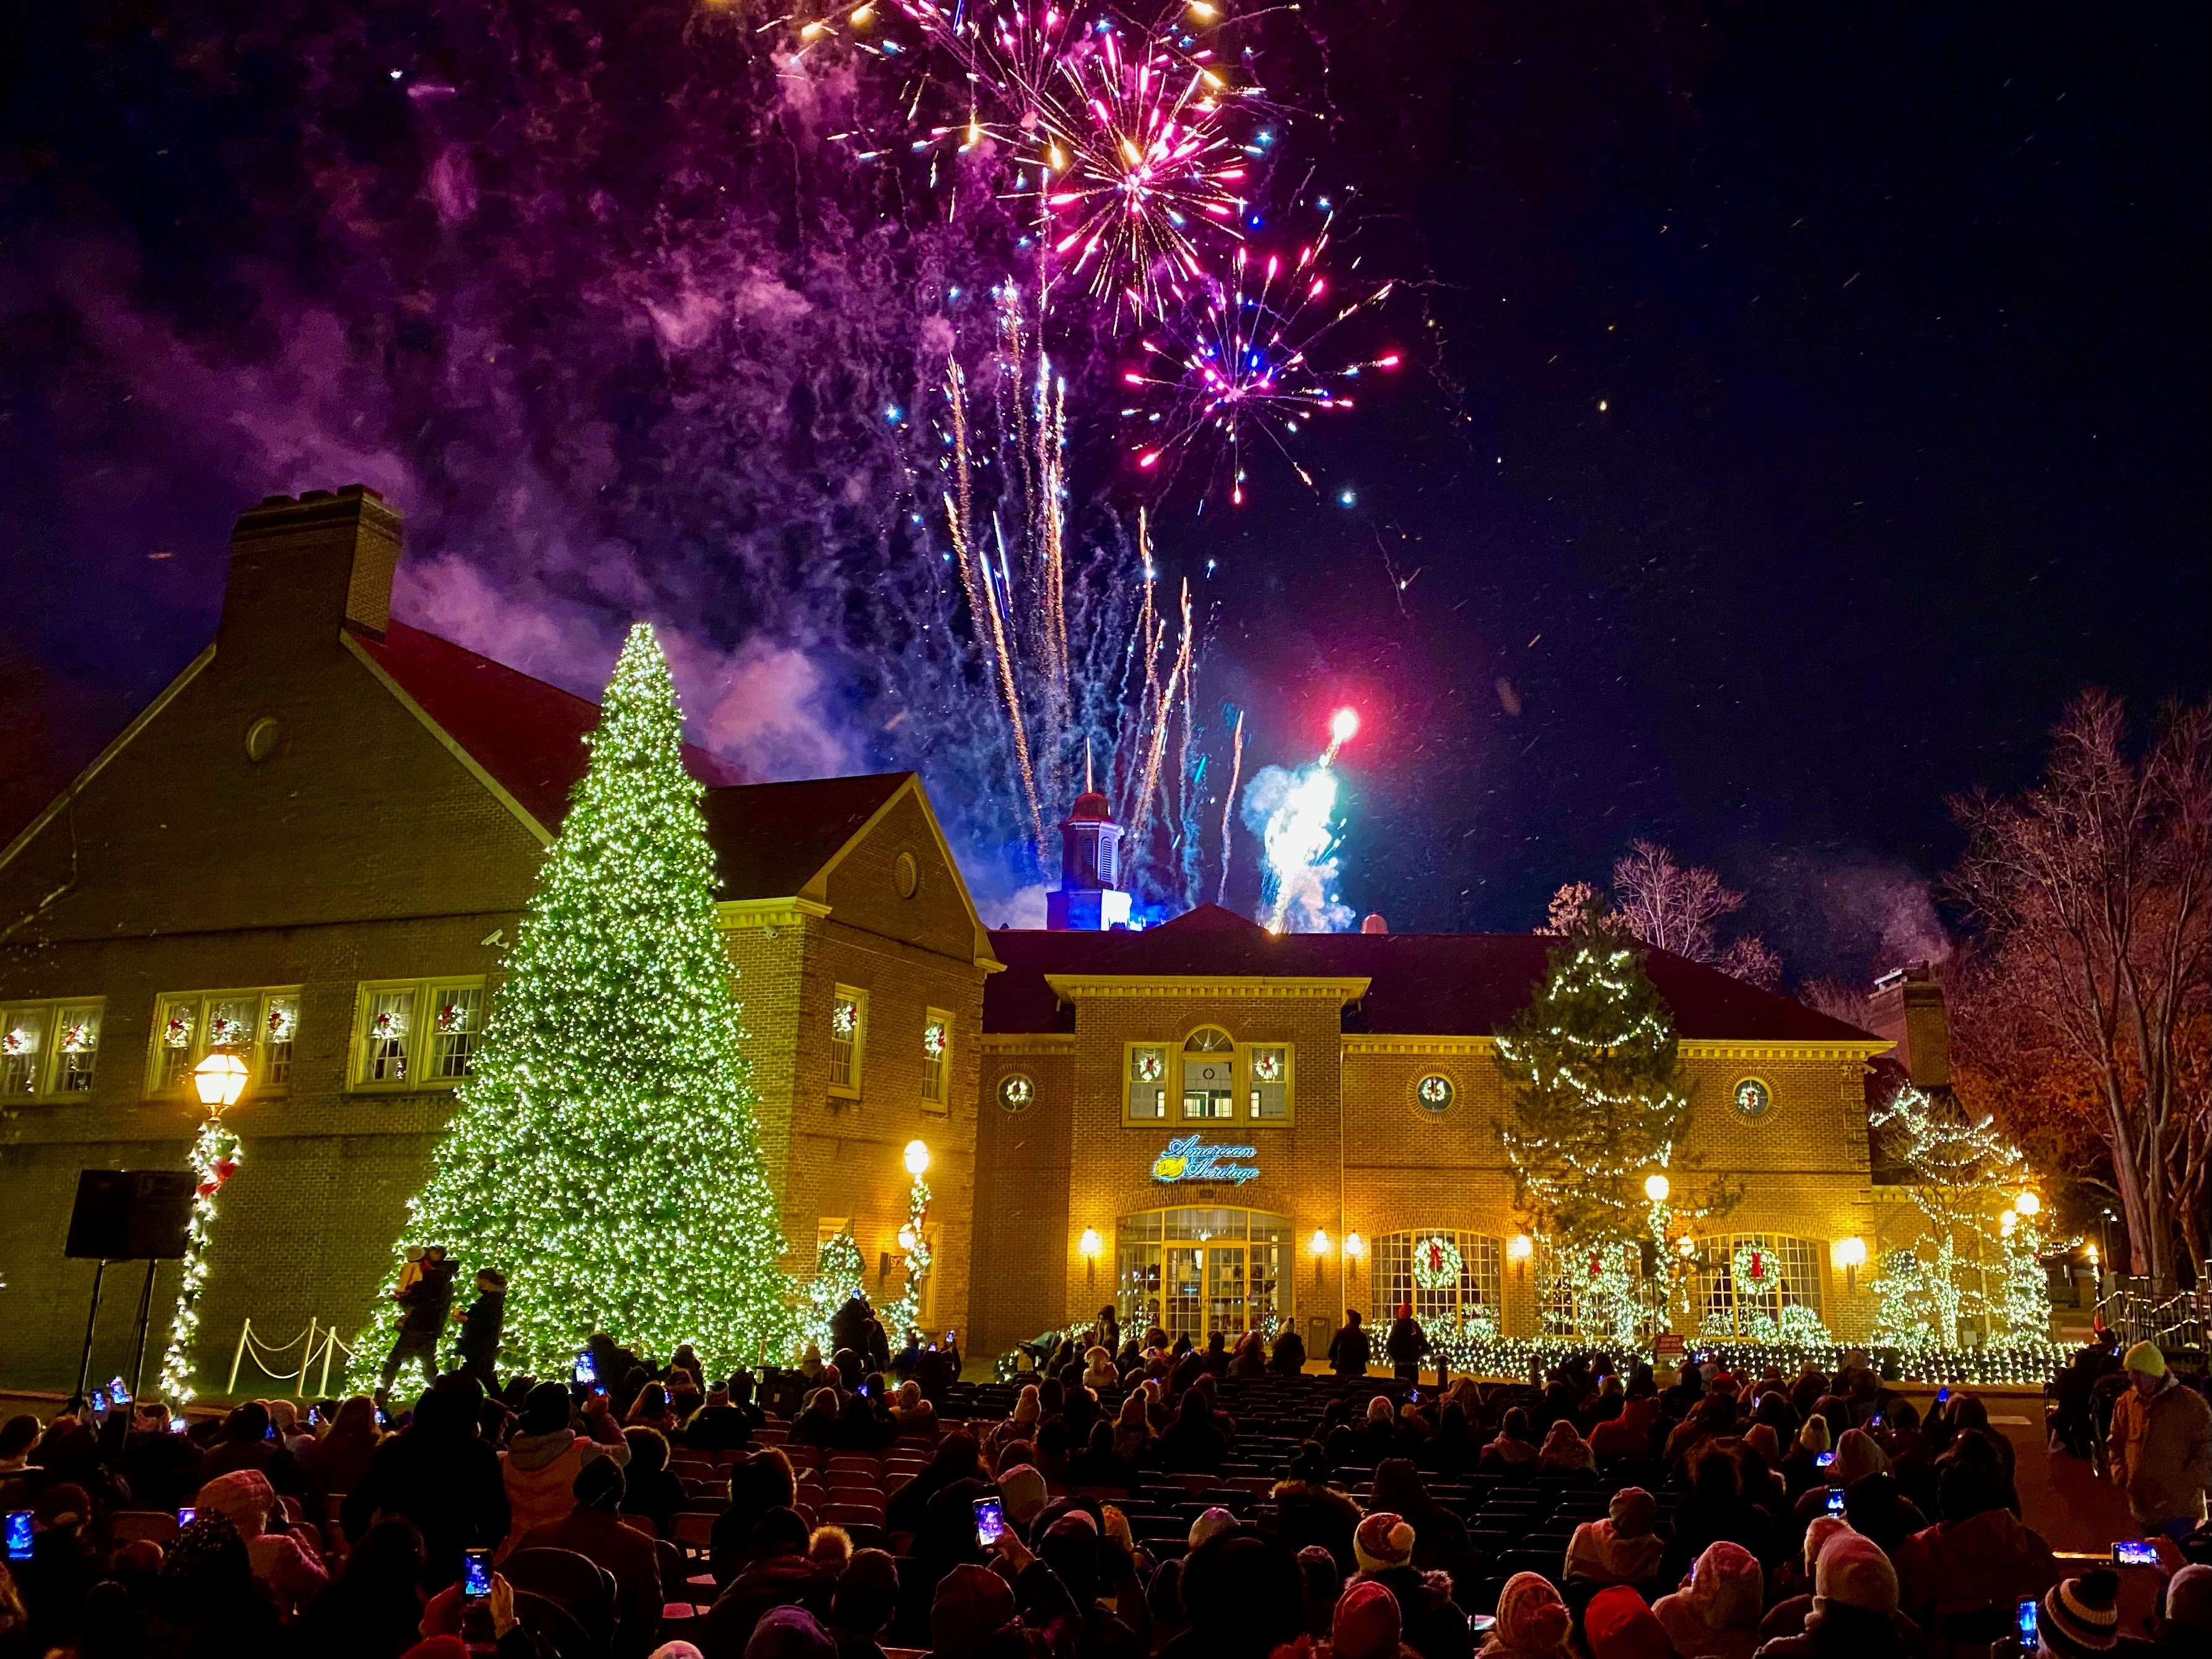 Fireworks light the sky behind an illuminated Christmas tree and building